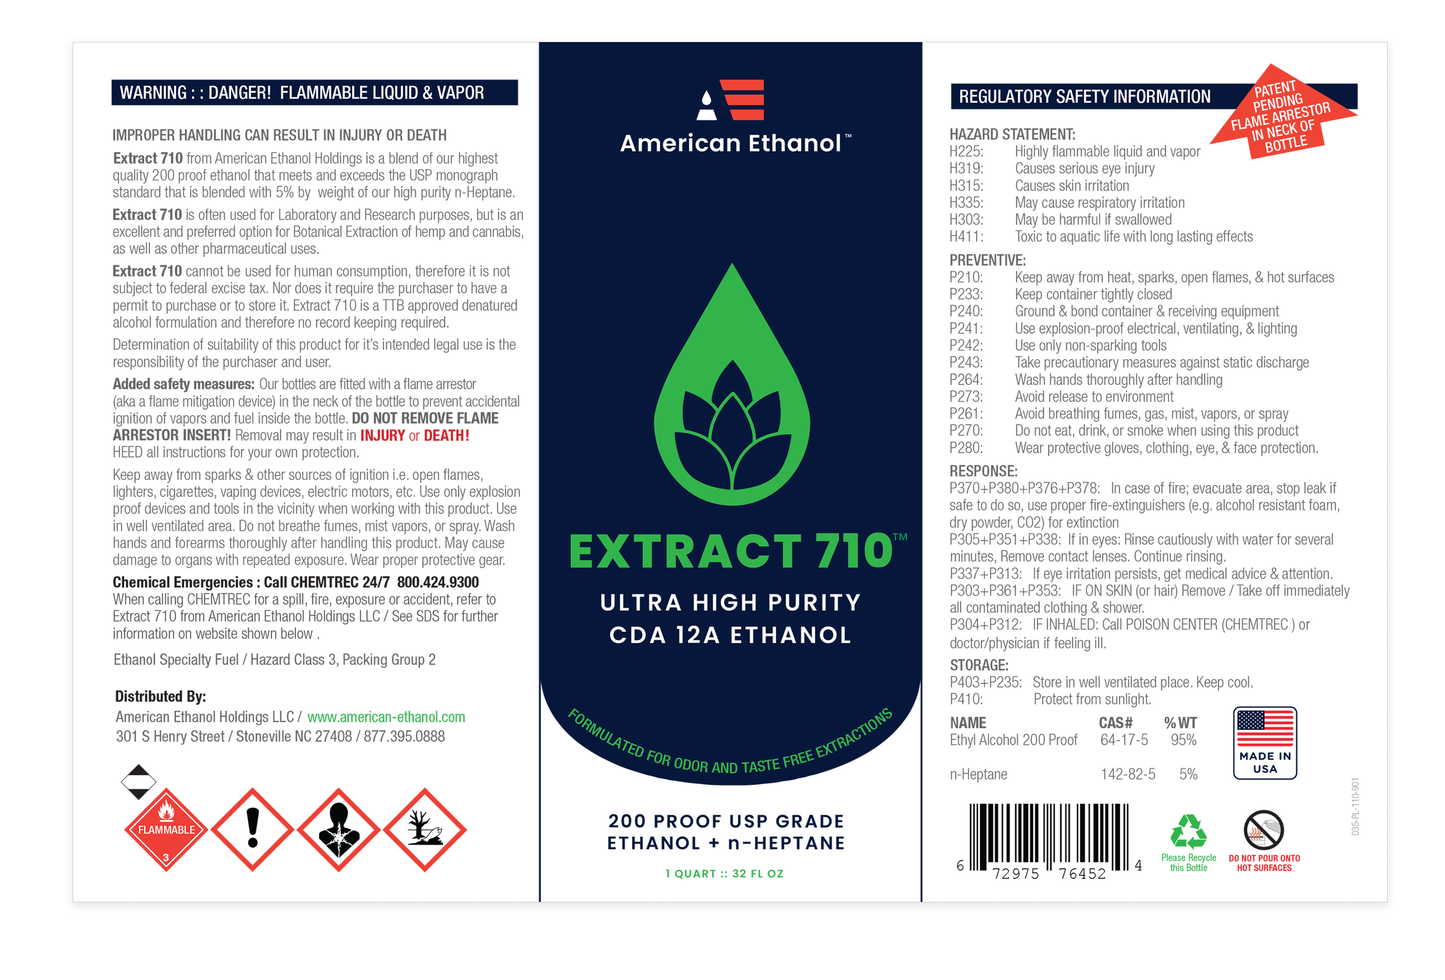 Extract 710 - CDA 12A Completely Denatured Ethanol with n-Heptane